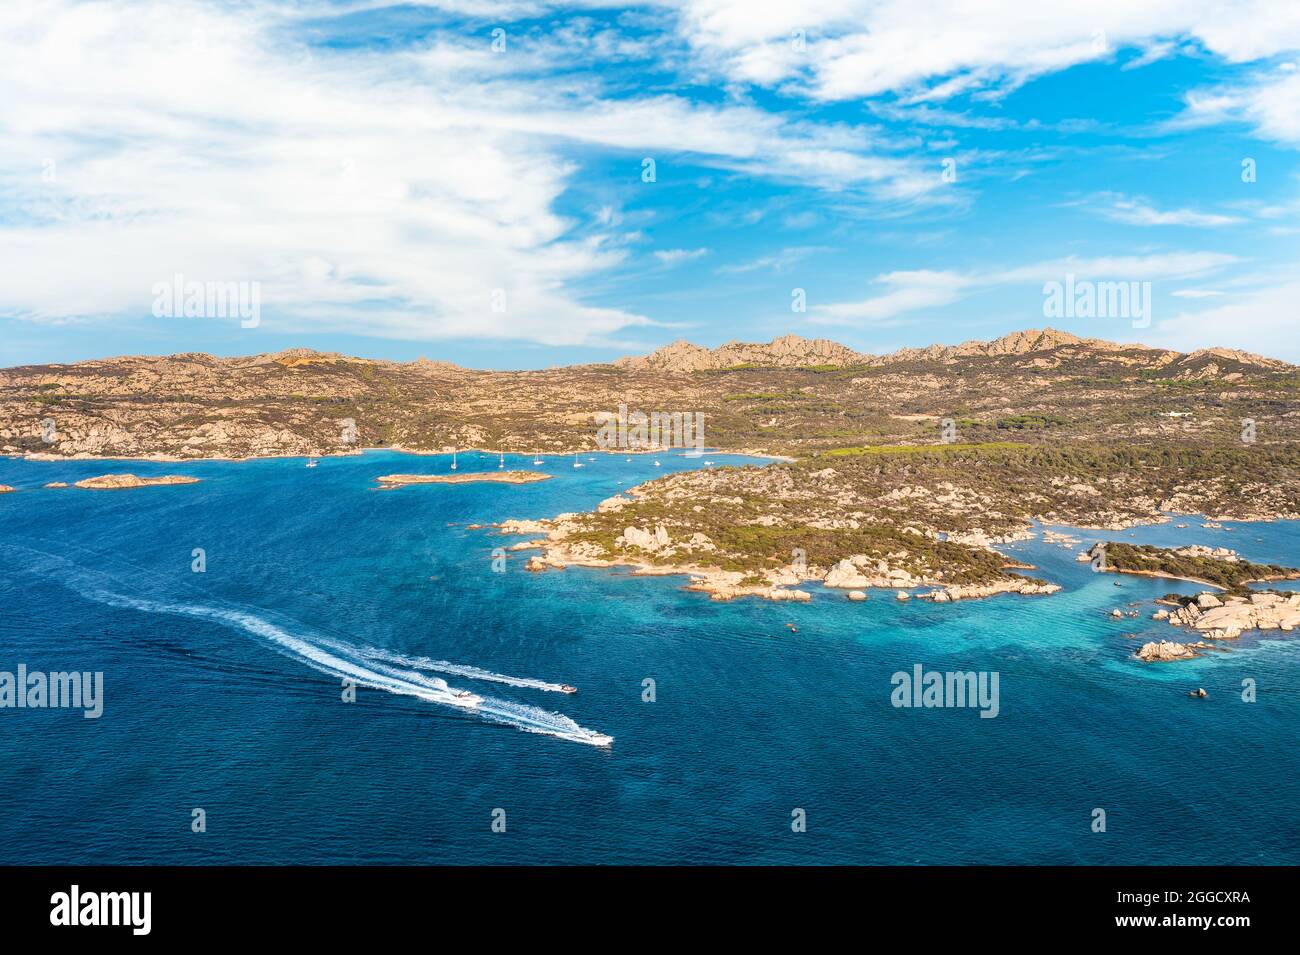 View from above, stunning aerial view of La Maddalena Archipelago with its turquoise, crystal clear bays of water. Caprera Island in the distance. Stock Photo